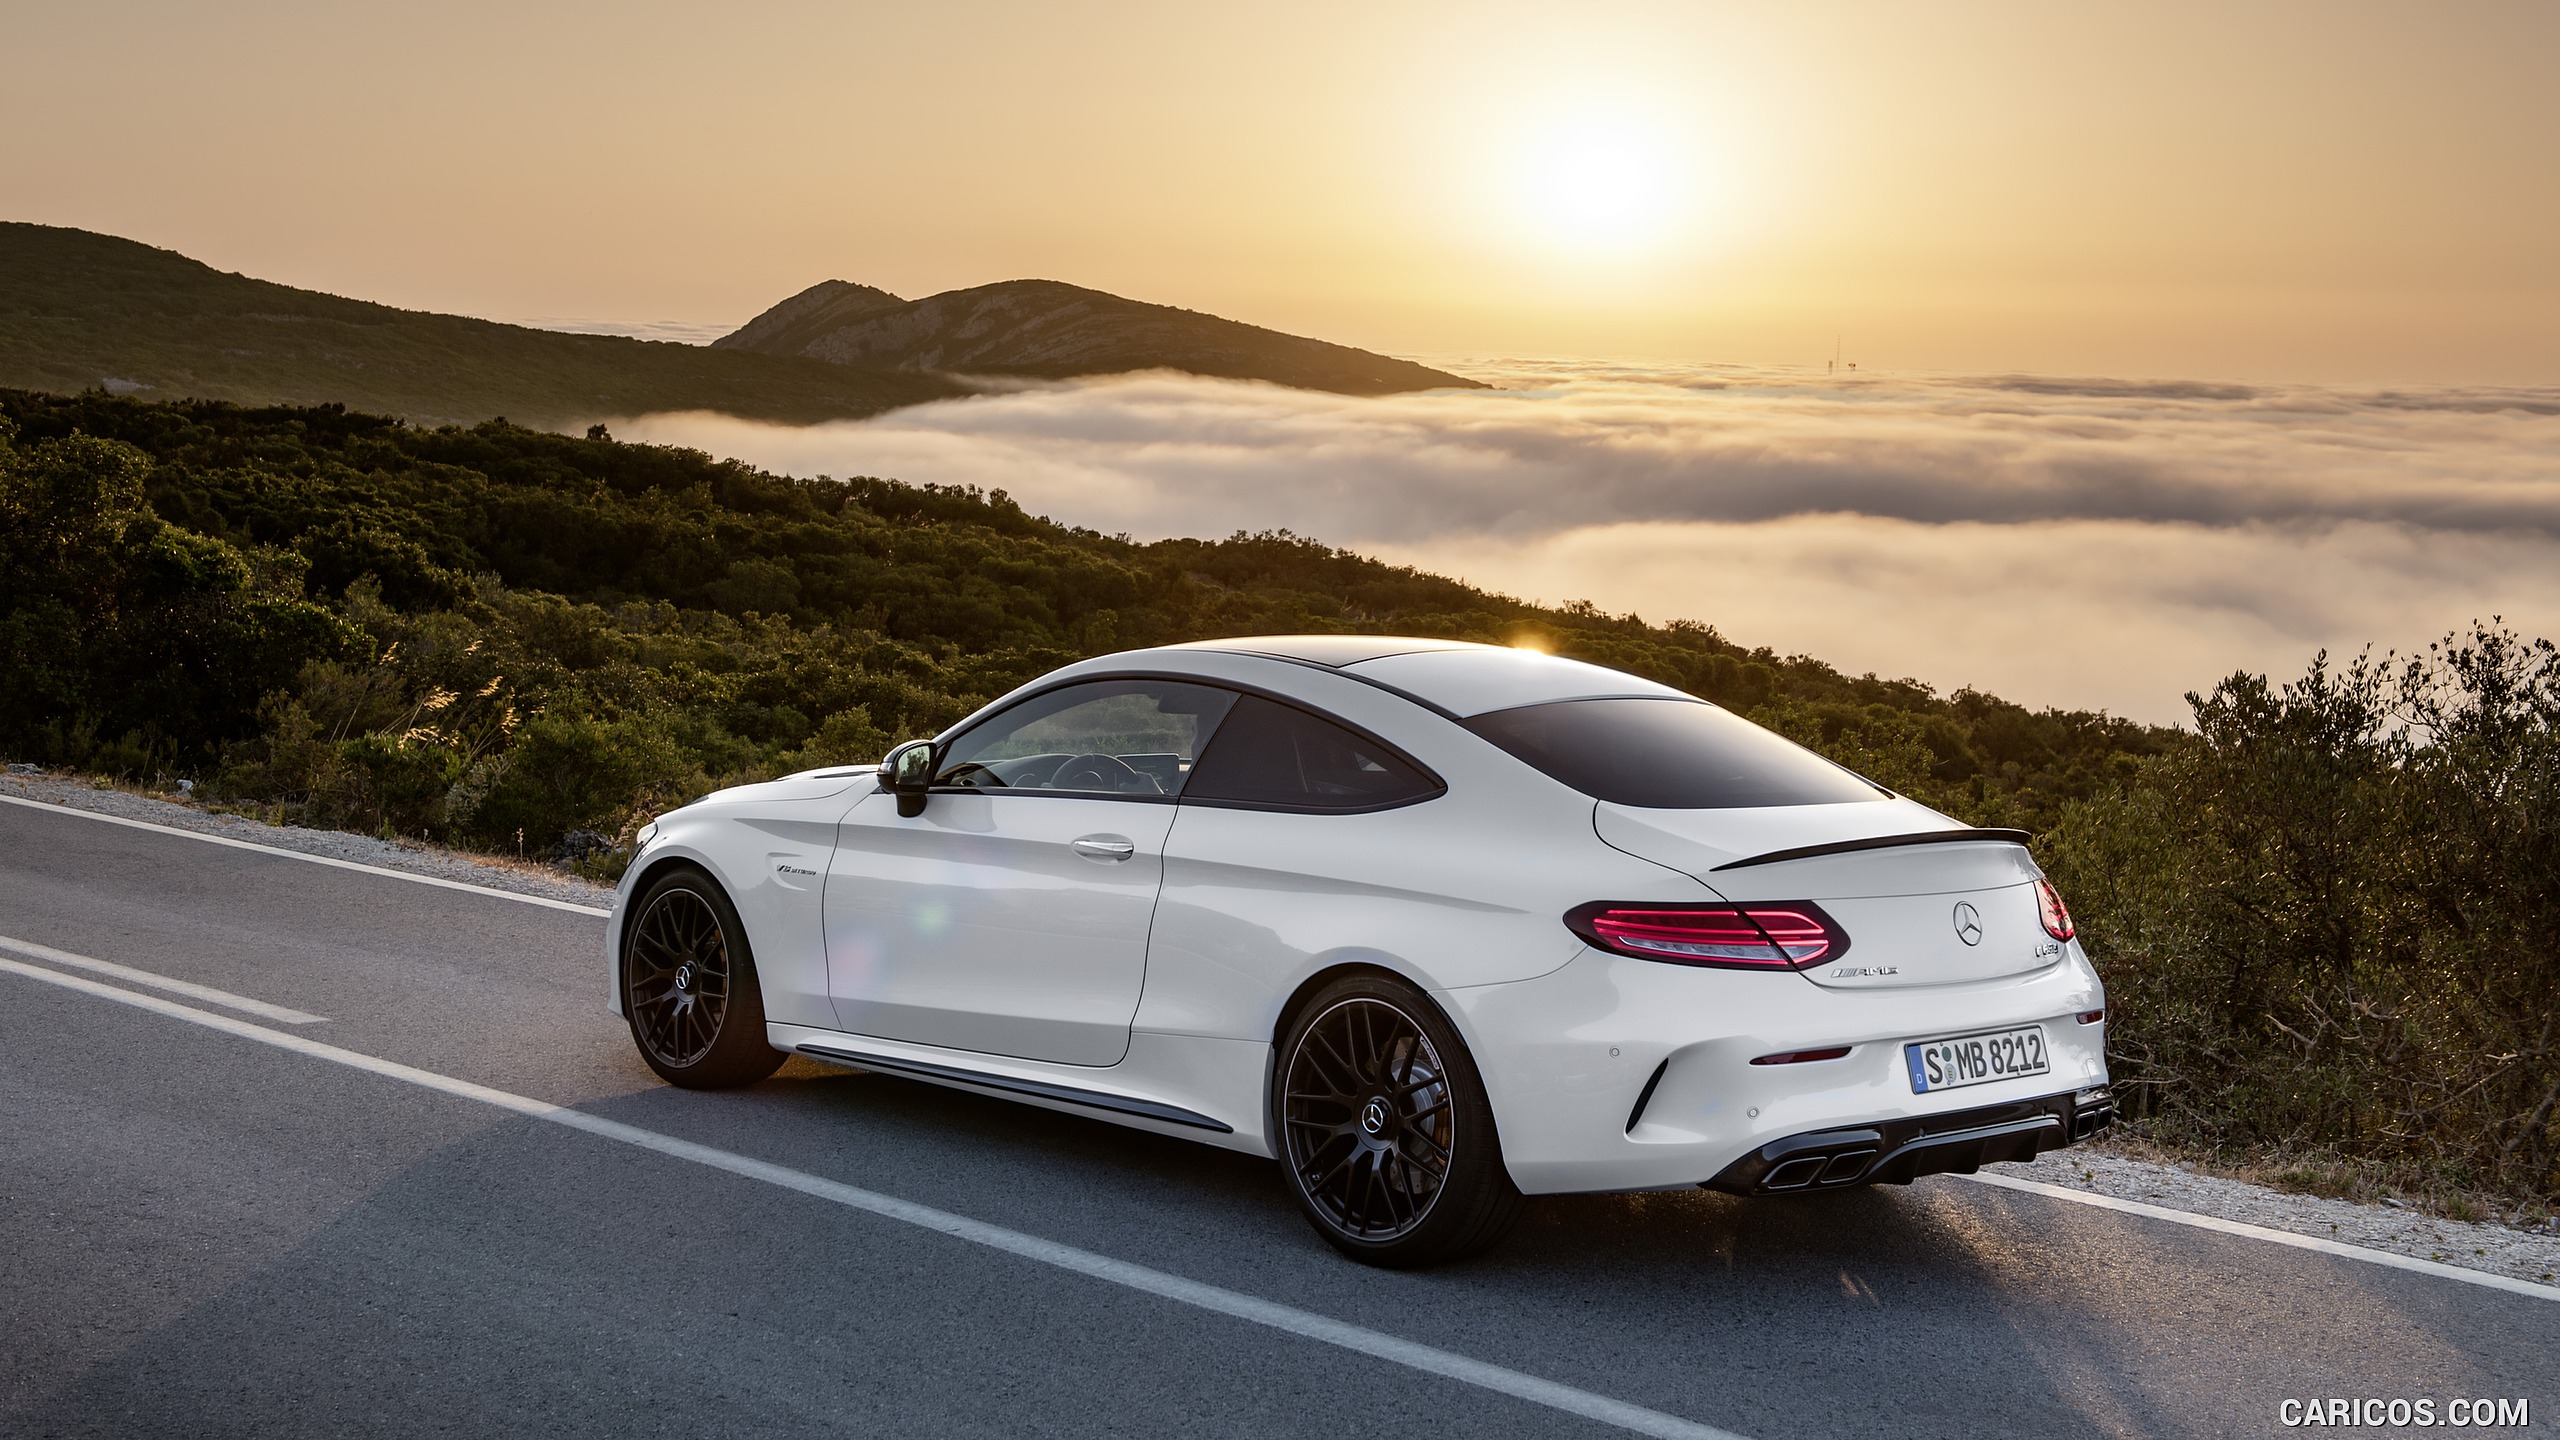 17 Mercedes Amg C63 Coupe Rear Hd Wallpaper 18